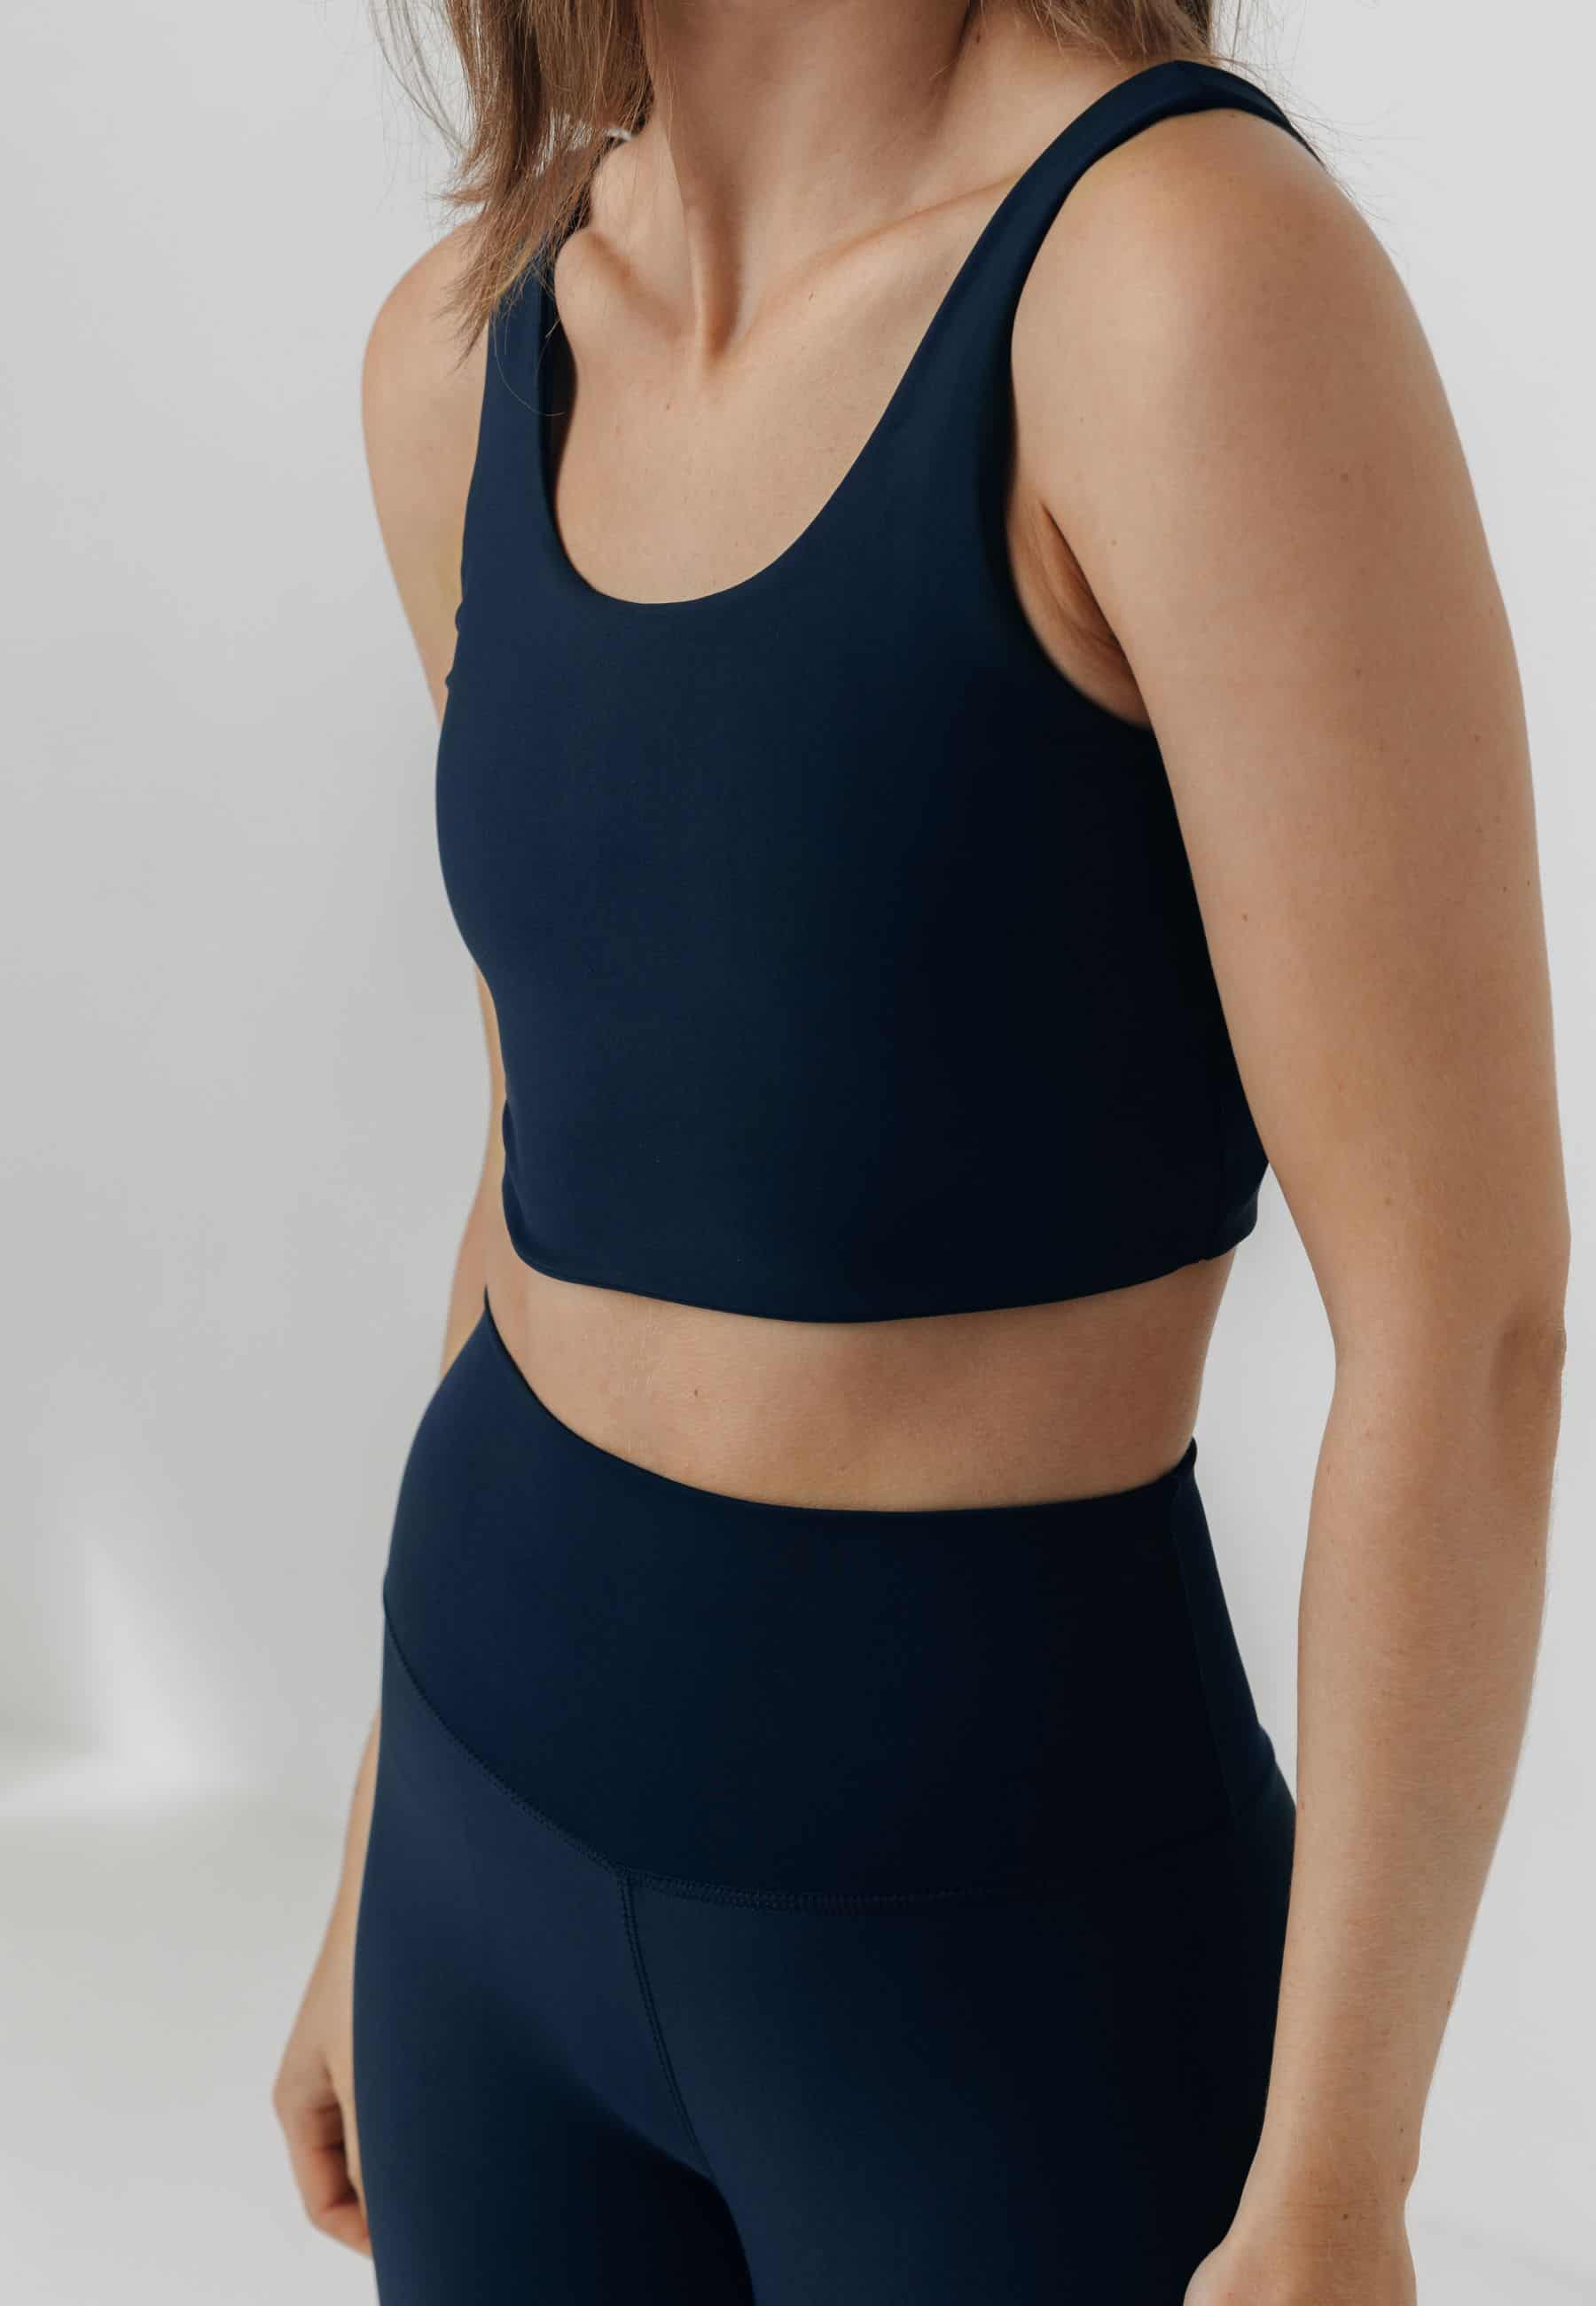 Sisterly Tribe - Midi Scoop Bra Navy. Light to medium support, Feminine and minimalistic design, Buttery Soft and light, matte fabric.